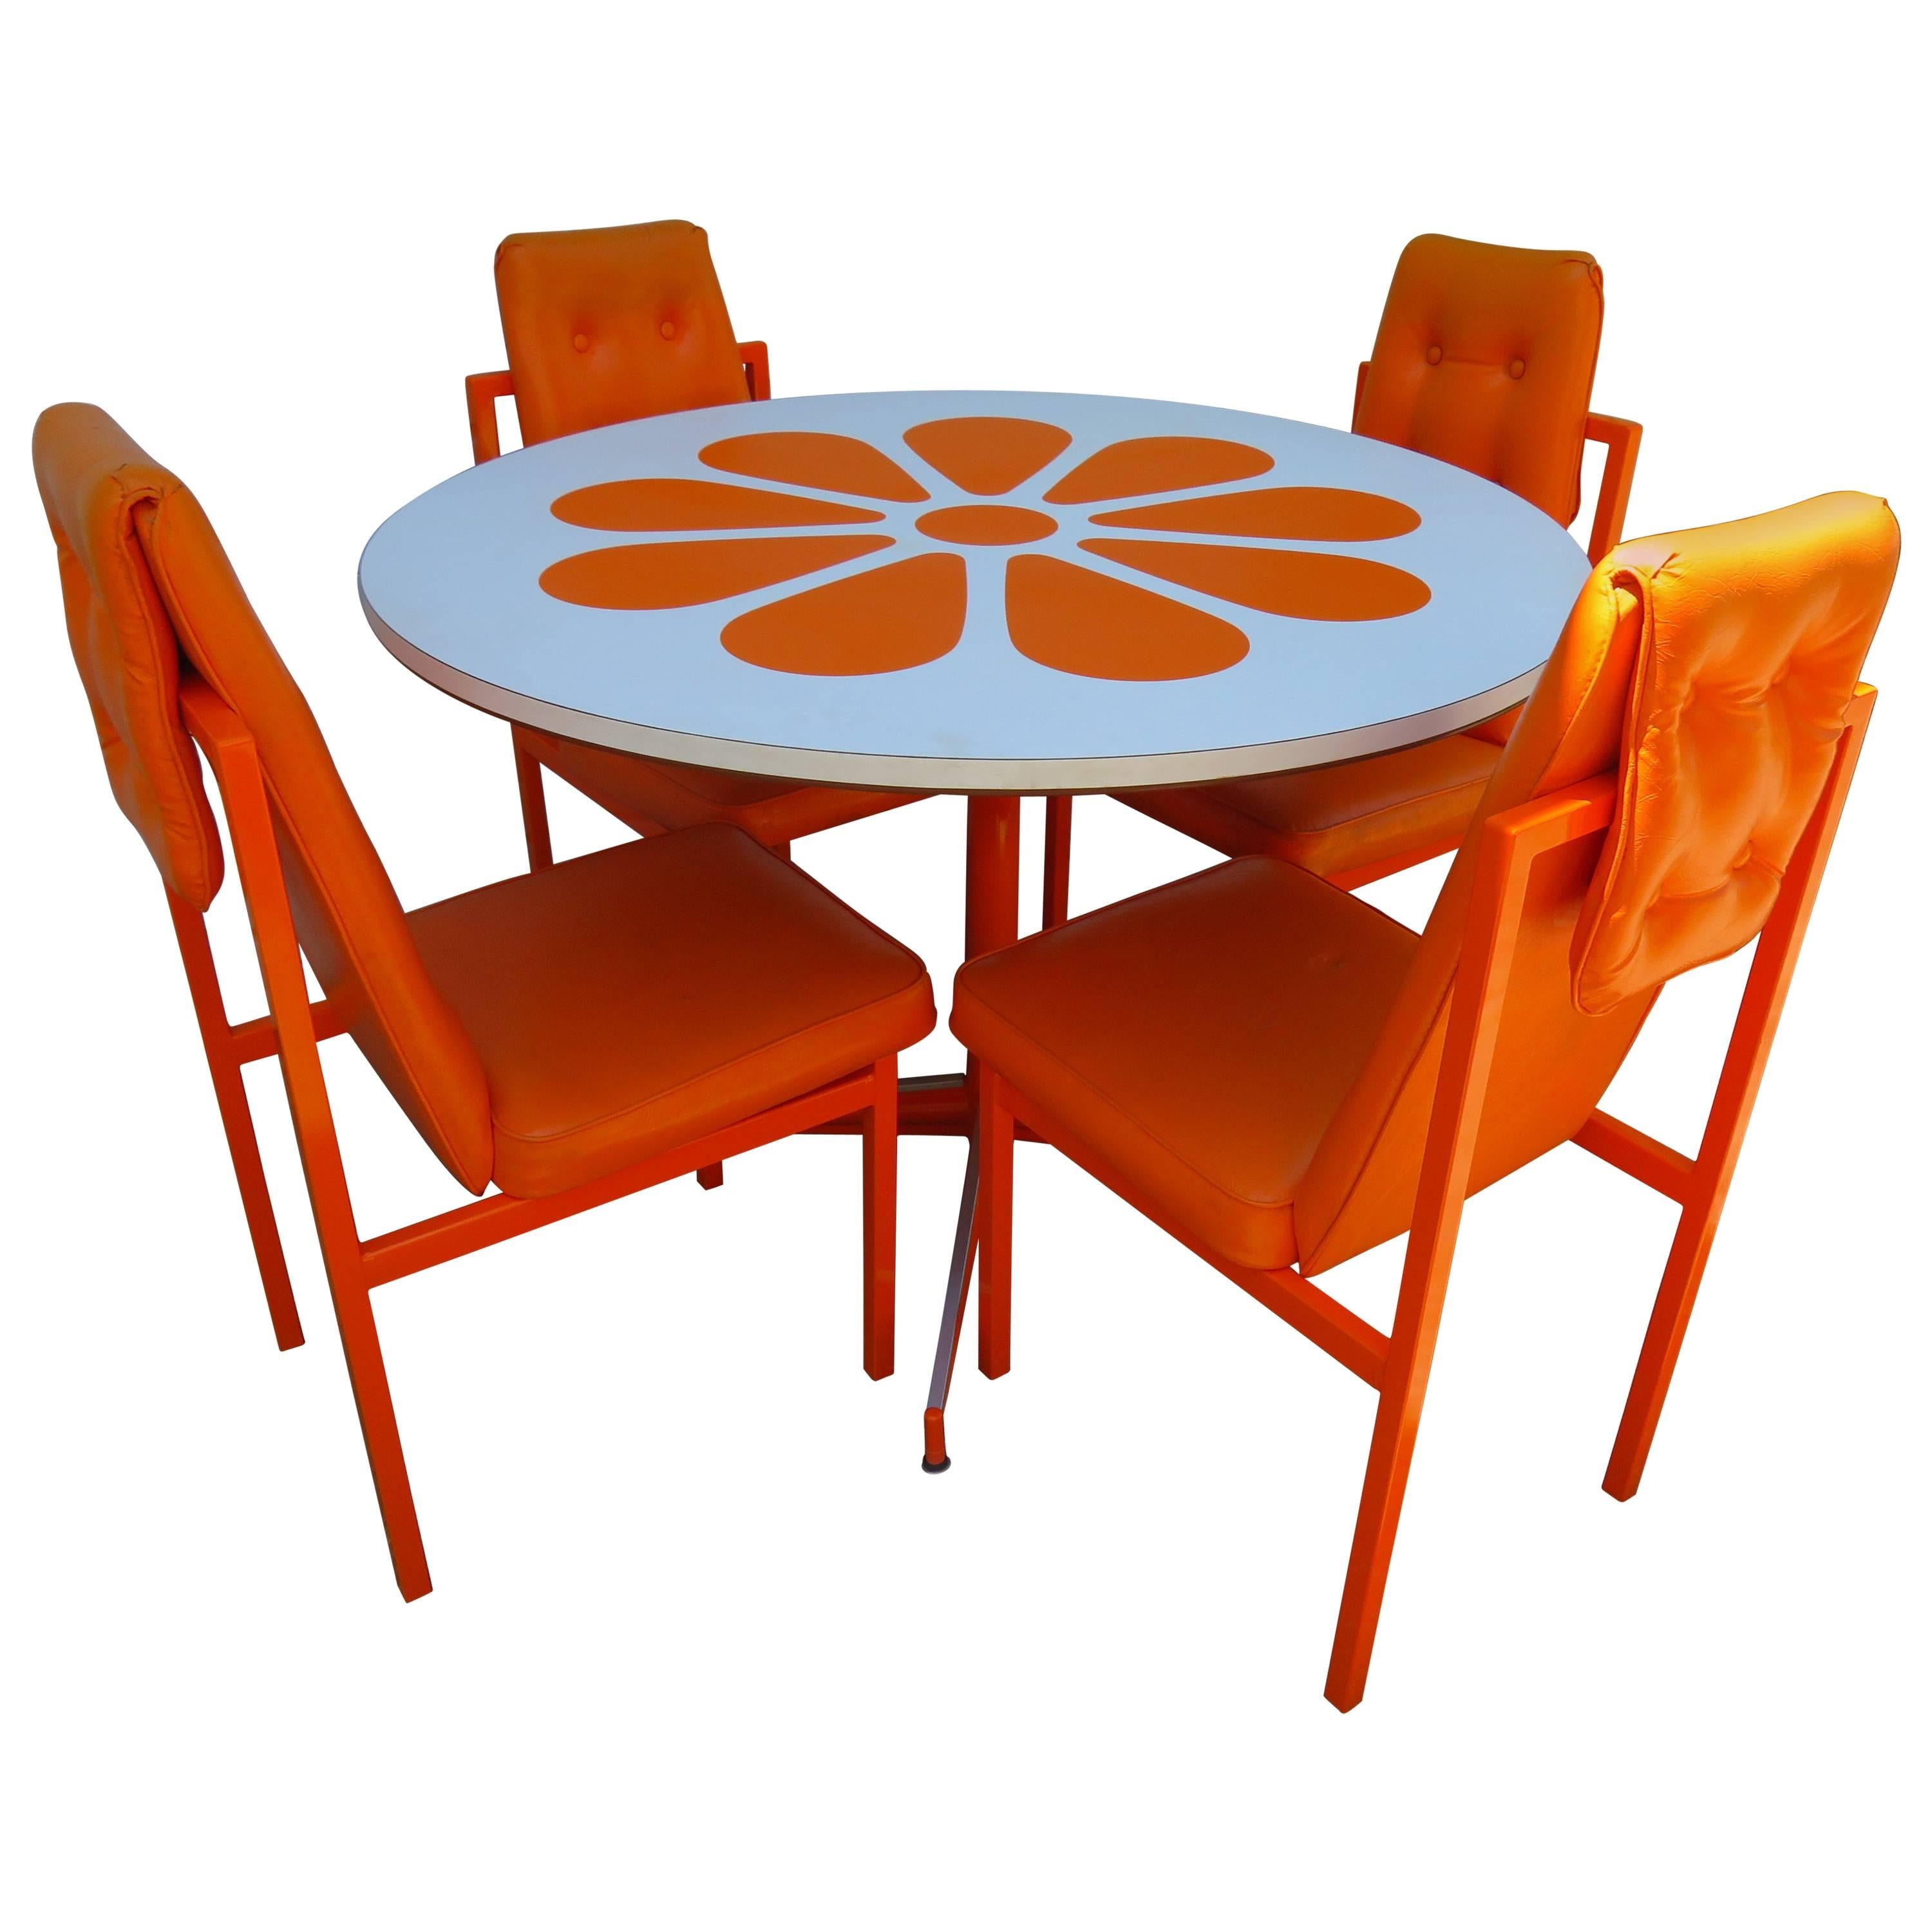 Fun Orange Slice 1960s Dining Table Four Chairs Probber Style Mid-Century Modern For Sale